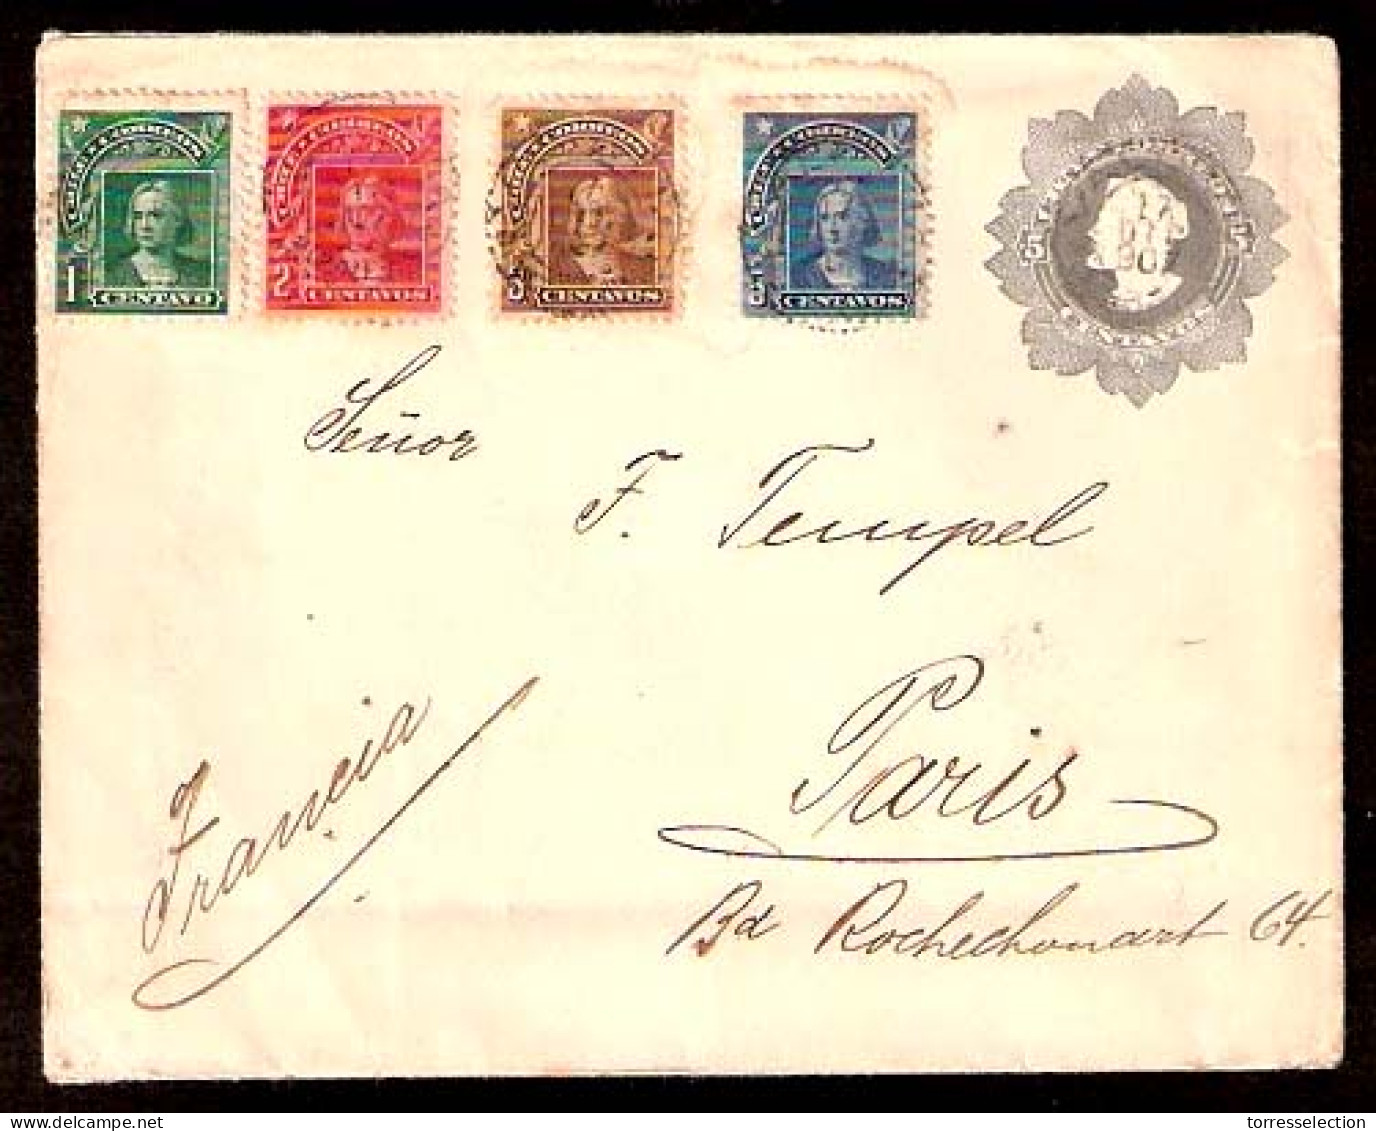 CHILE - Stationery. 1907. Valdivia - France. Stat Env + 4 Xtra Colors Adtls. Nice. - Chile